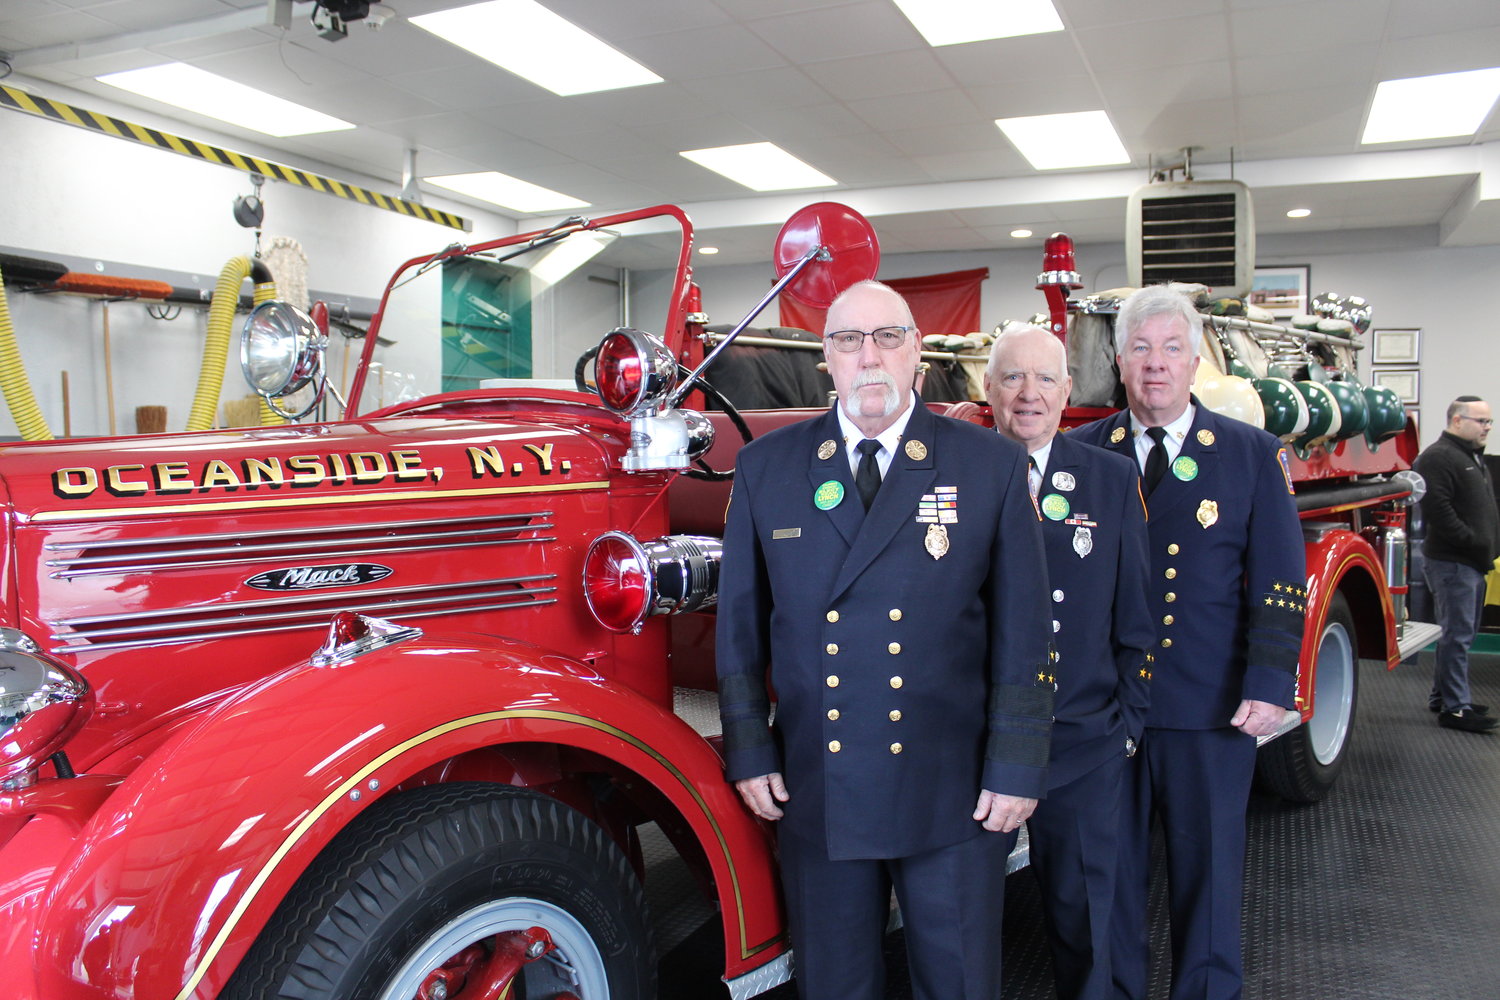 They sought it, and found it — a 1947 Mack truck that has been the focus of a quest by Columbia Engine Company No. 1 Historical Committee members Fredrick Robinson, Paul Facella and Bill Lynch for some time. After a restoration, the antique engine has now returned home.